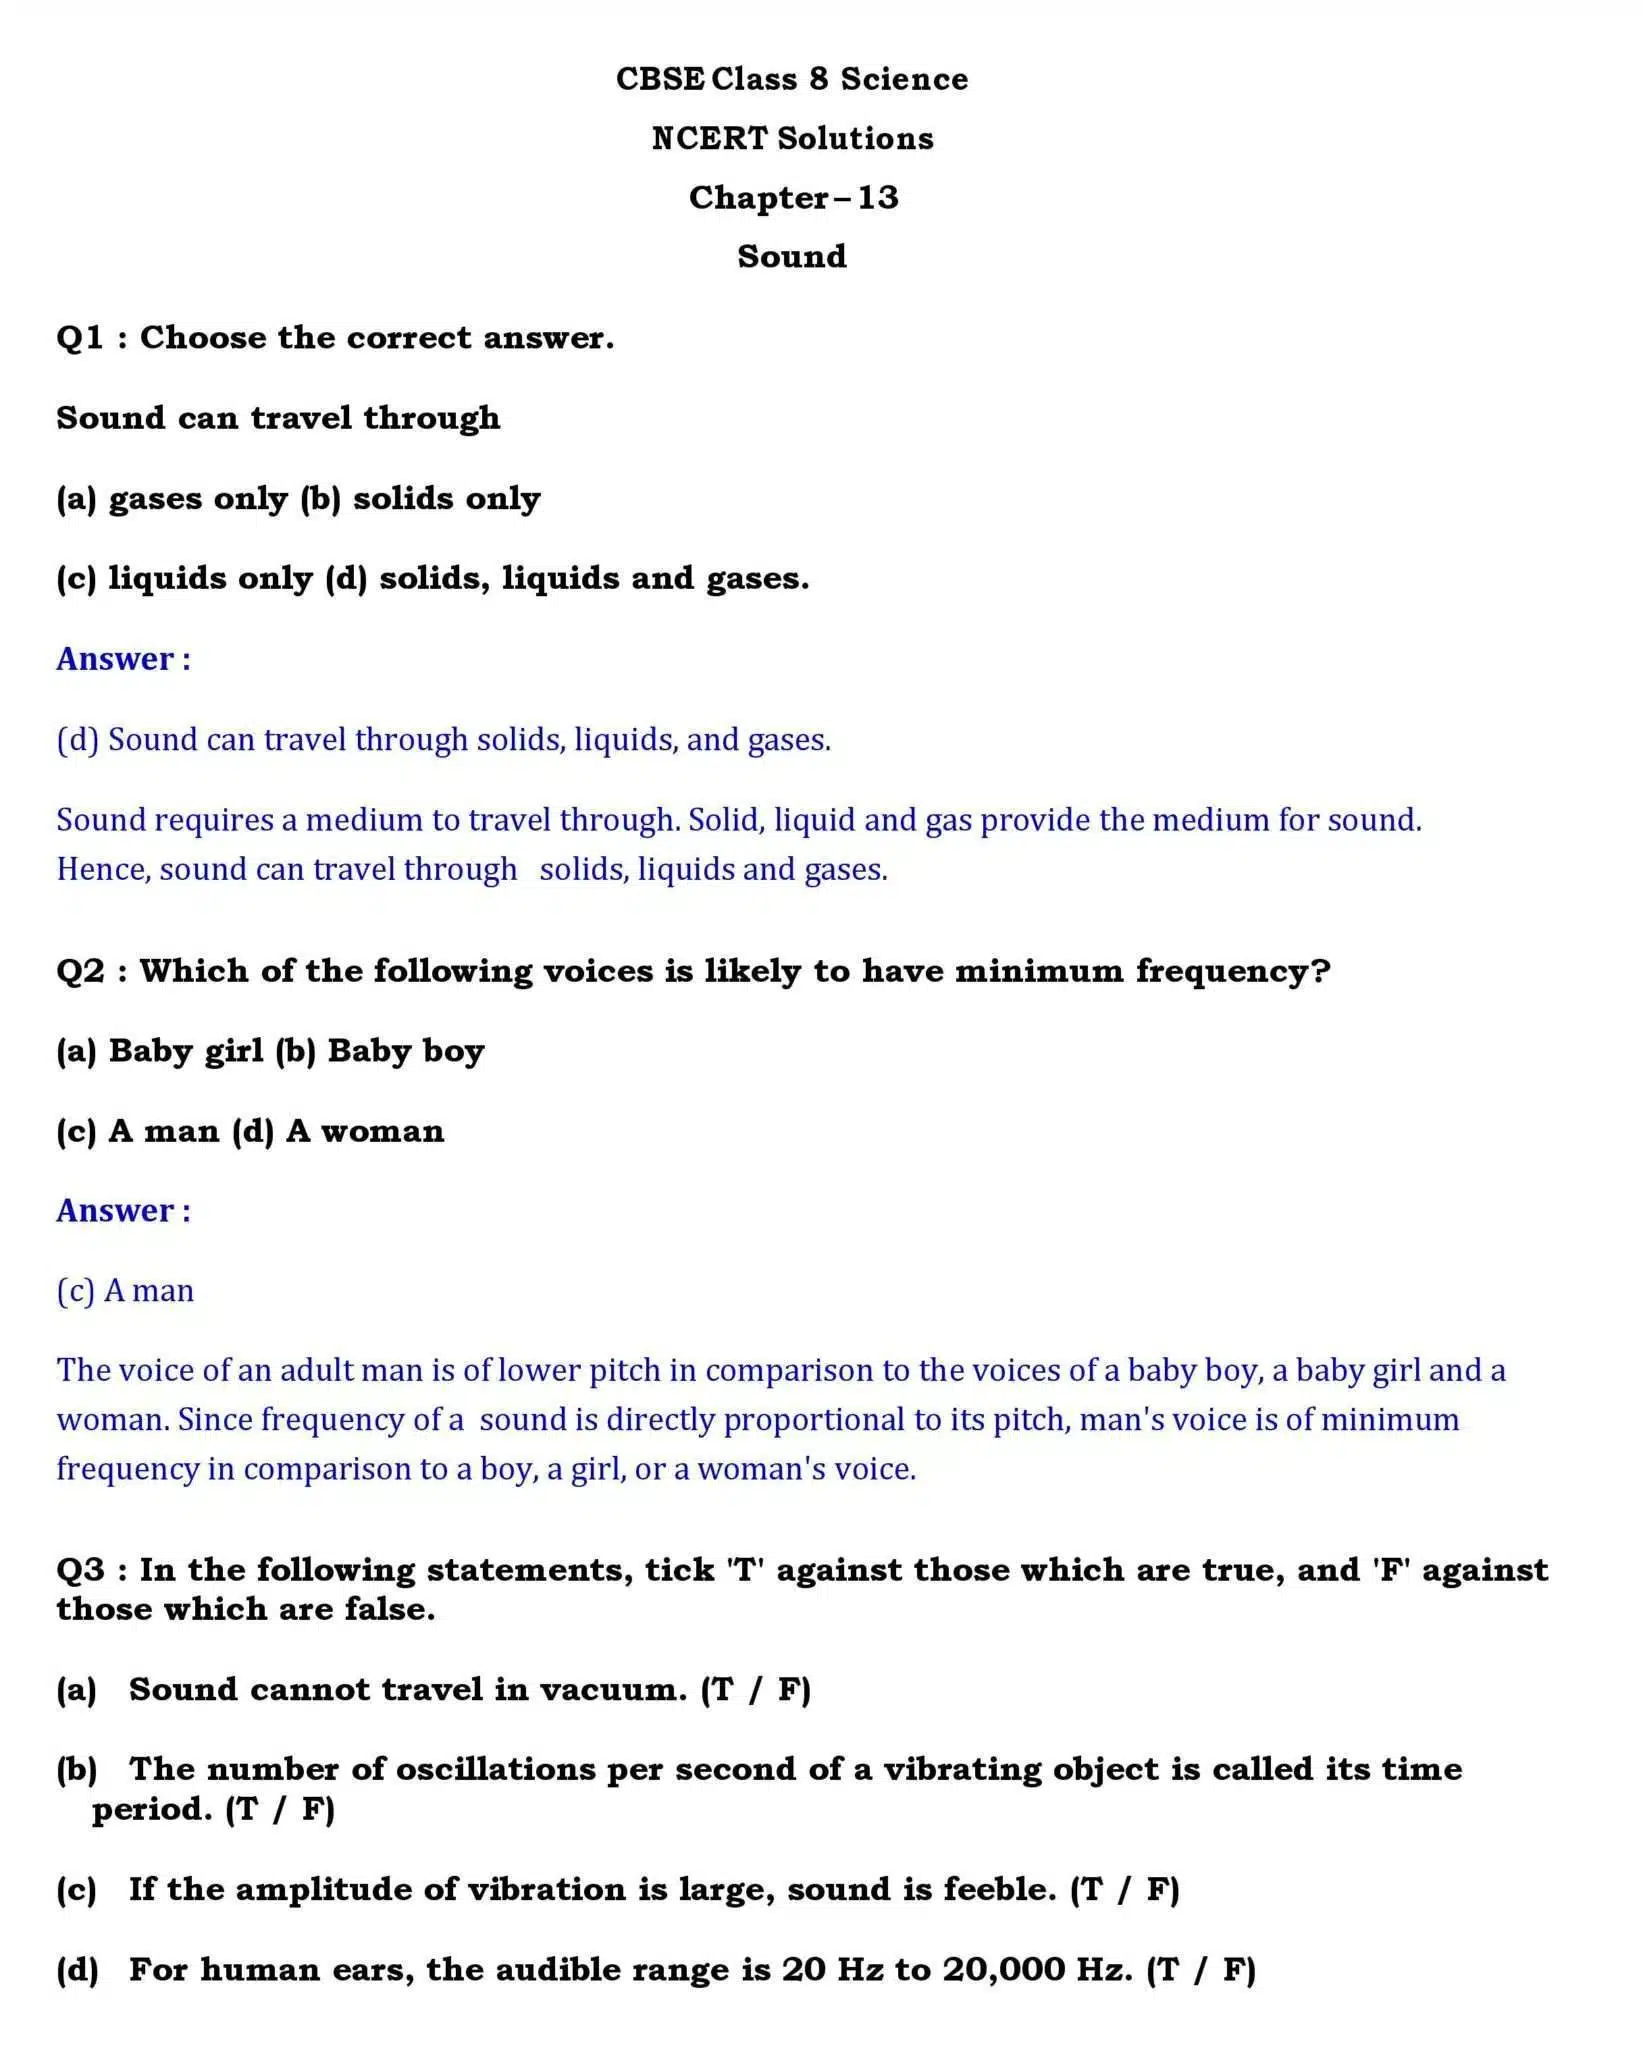 NCERT Solutions for Class 8 Science Chapter 13 page 001 1